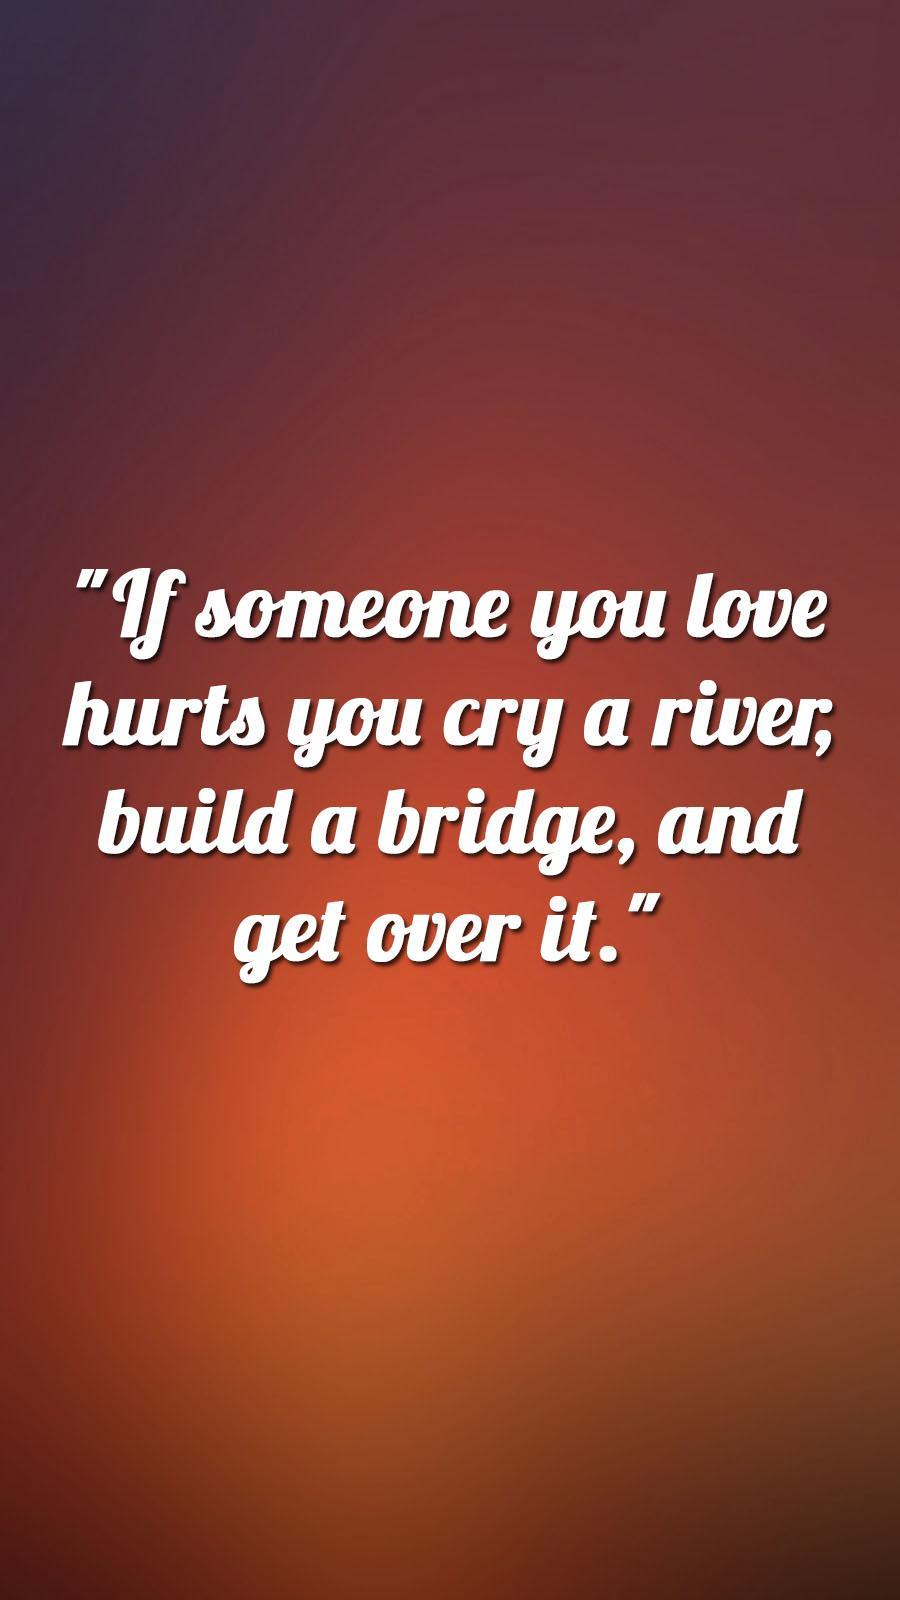 Love Breakup Quotes For Him - Broken Heart Sayings APK per Android ...